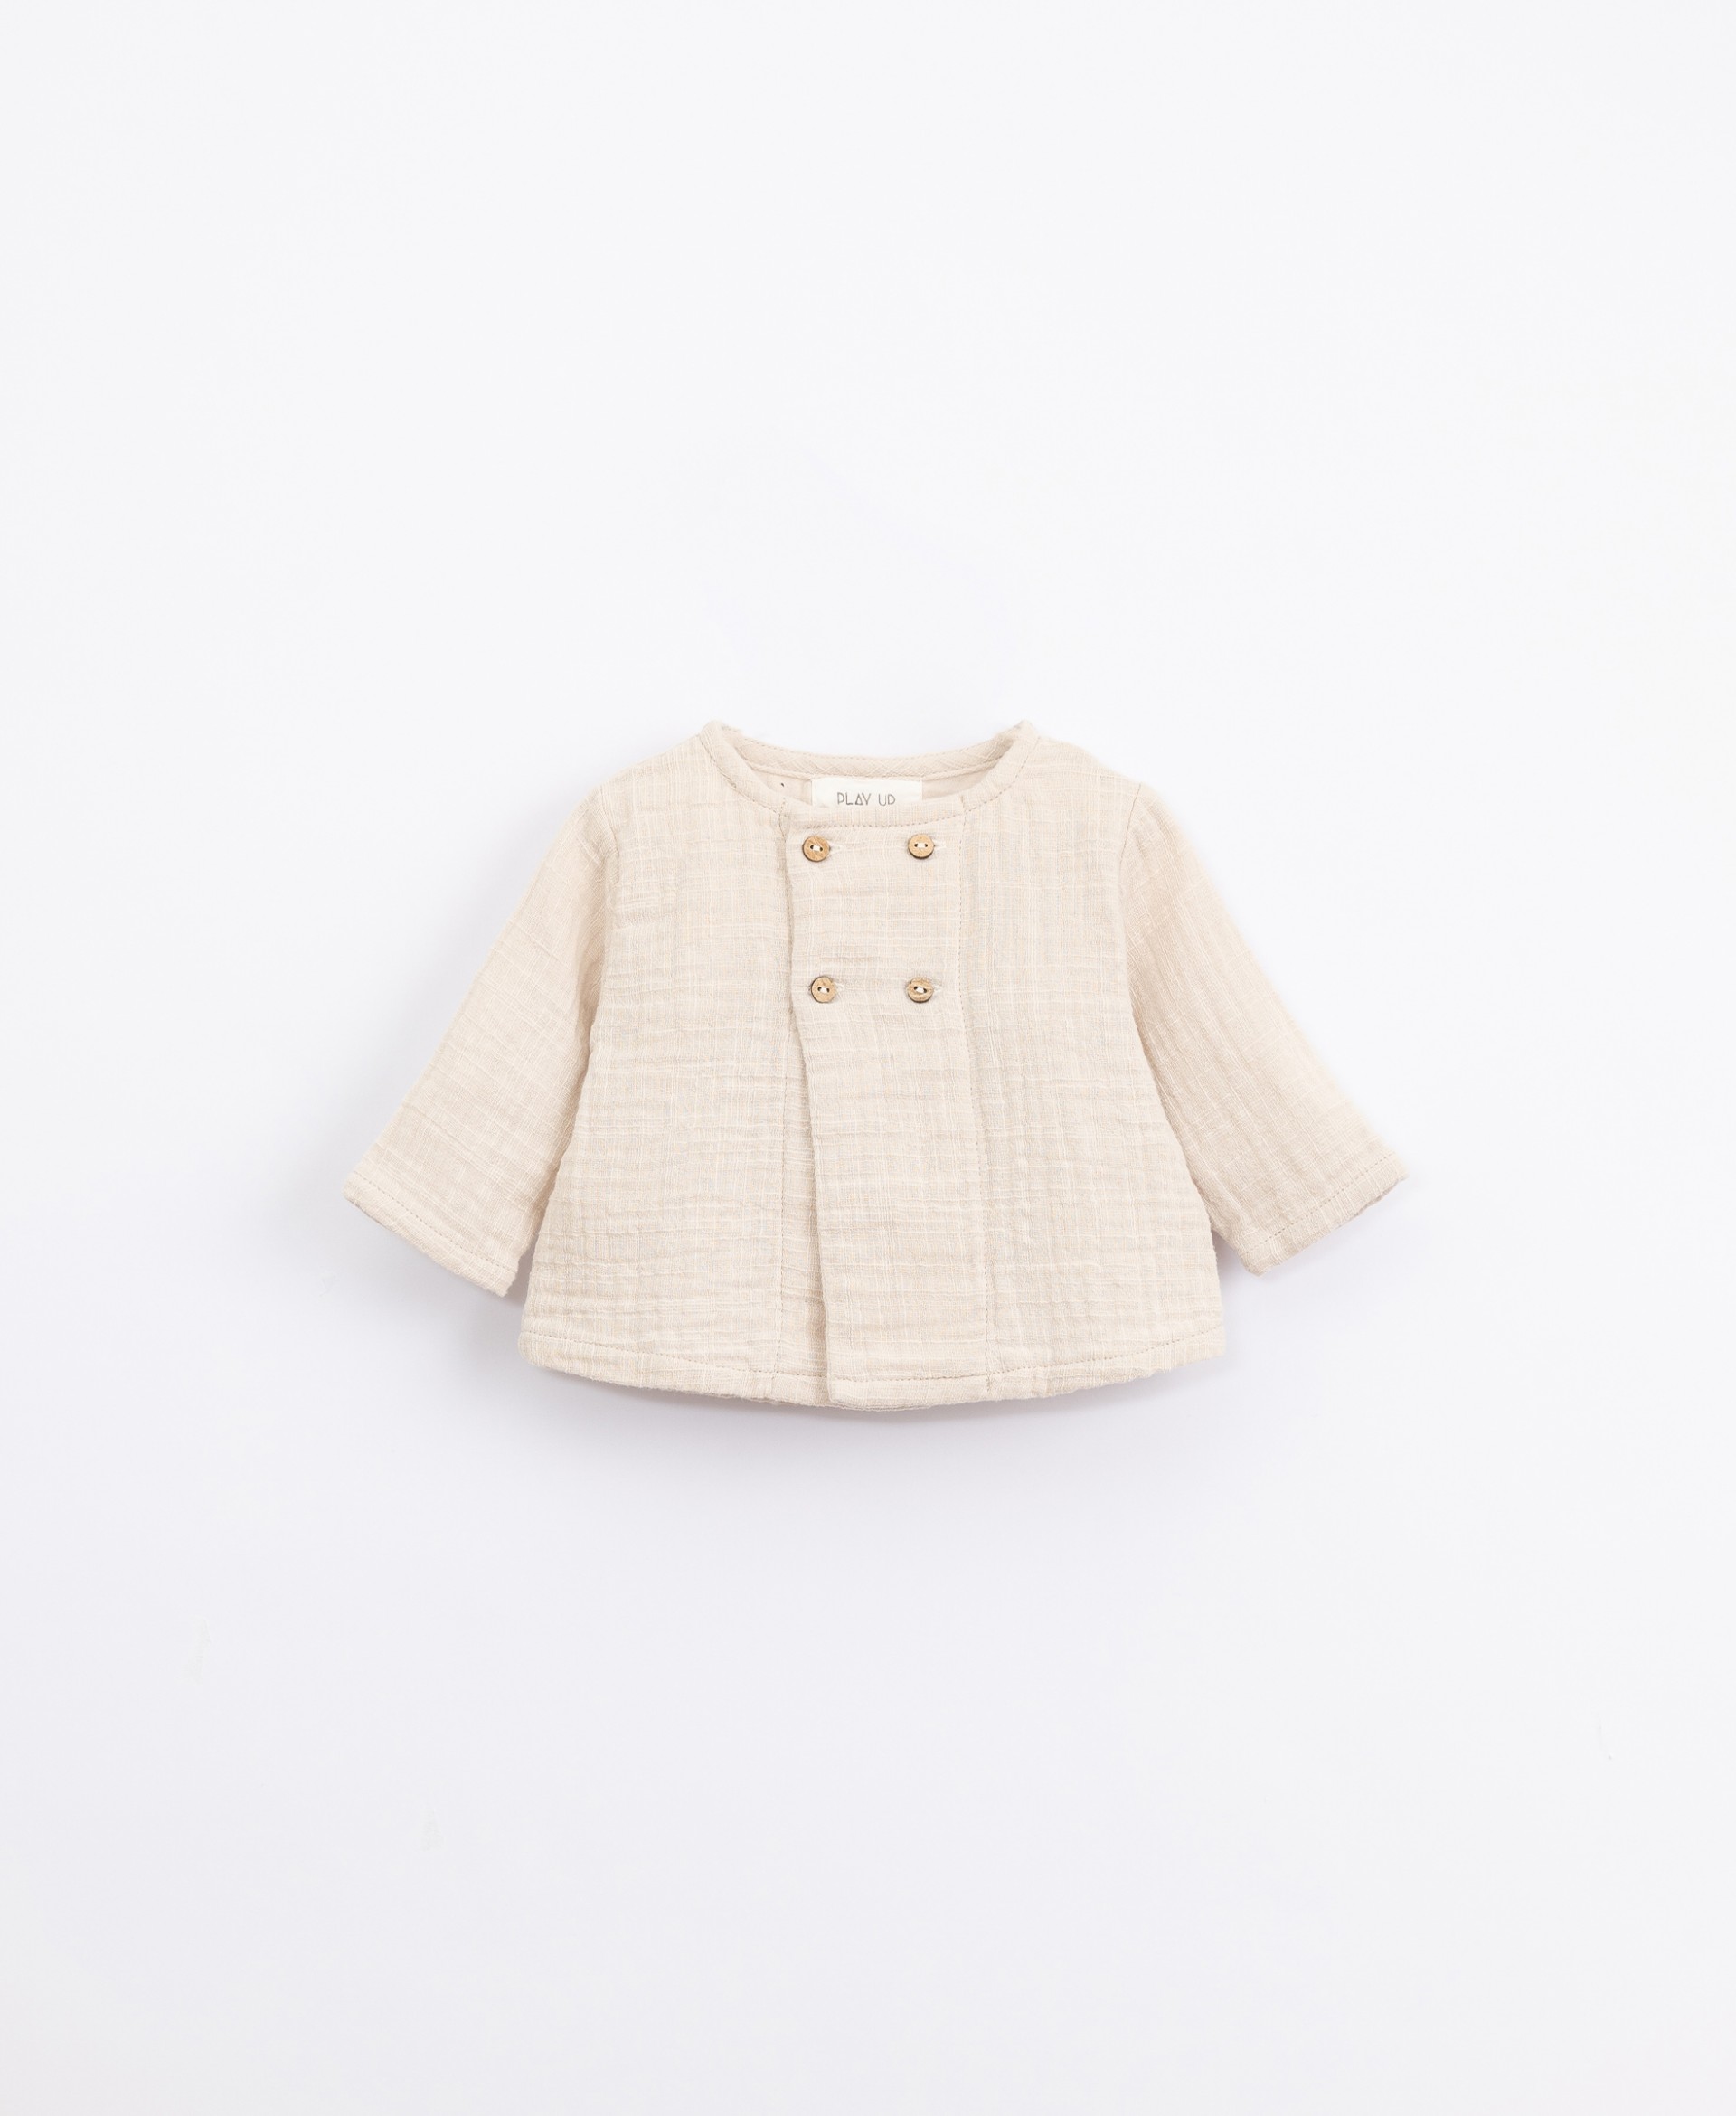 Cotton jersey with coconut buttons| Illustration